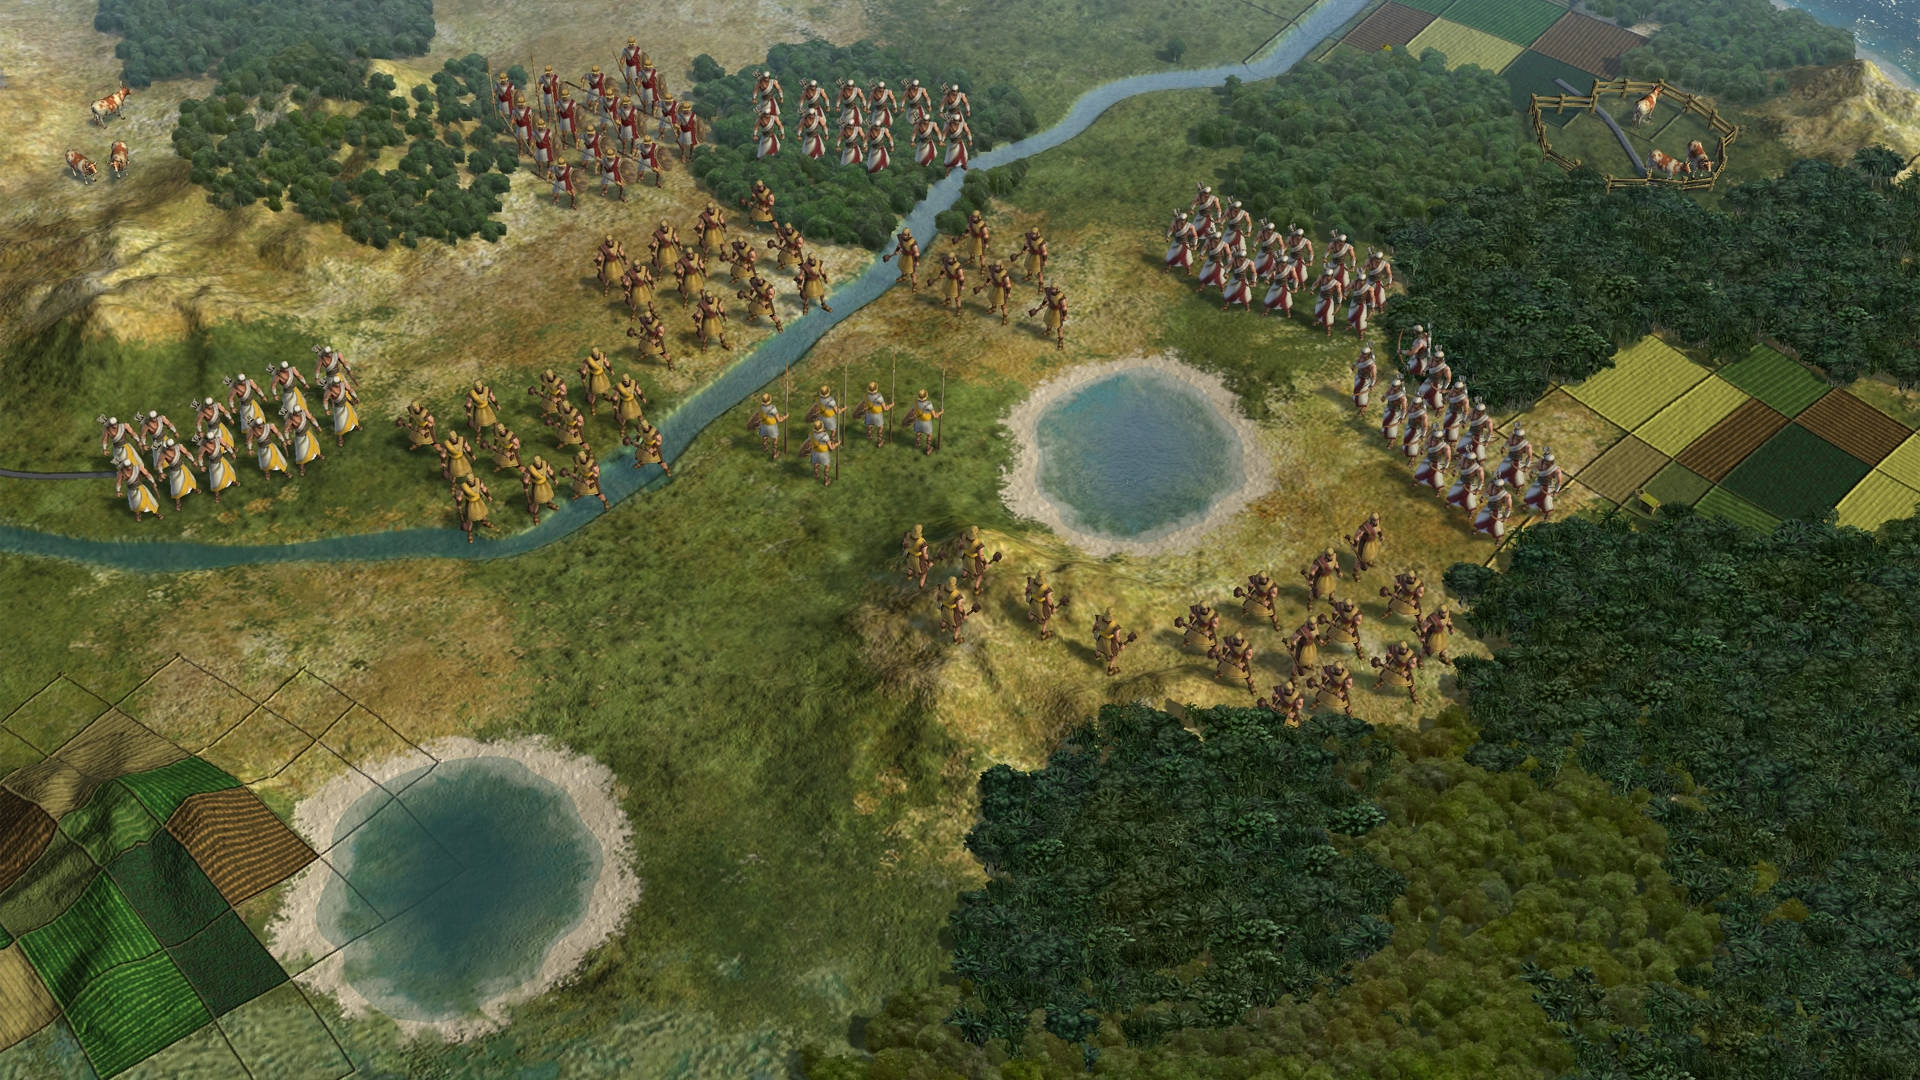 Epic Game Scene From Civilization 5 Background